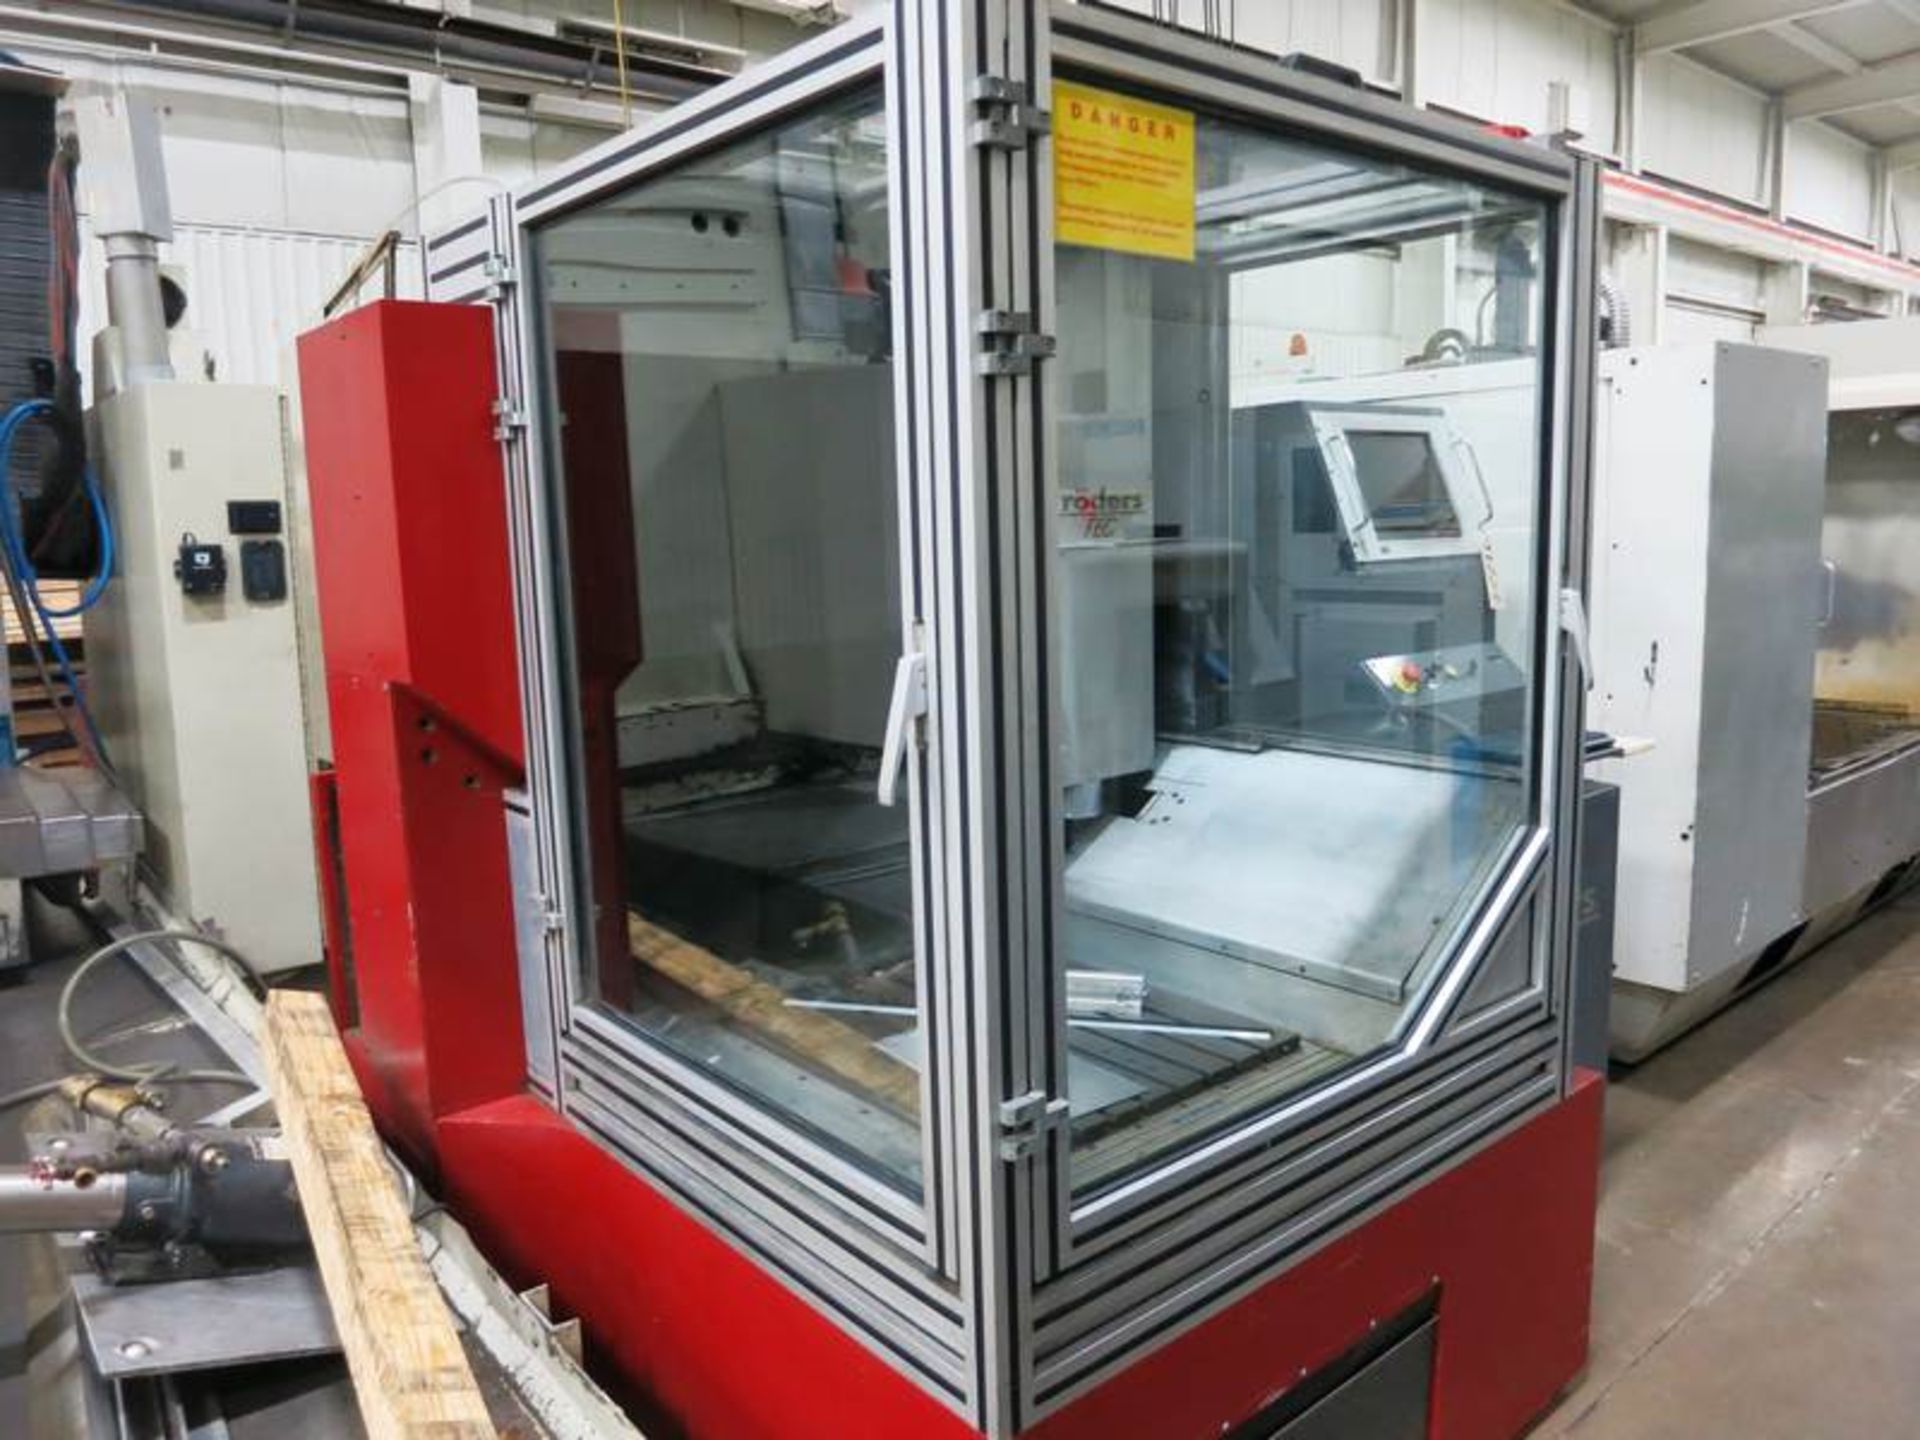 Roders Tec RFM600 CNC 3-Axis High Speed Vertical Machining Center, S/N 87995-43 - Image 3 of 9